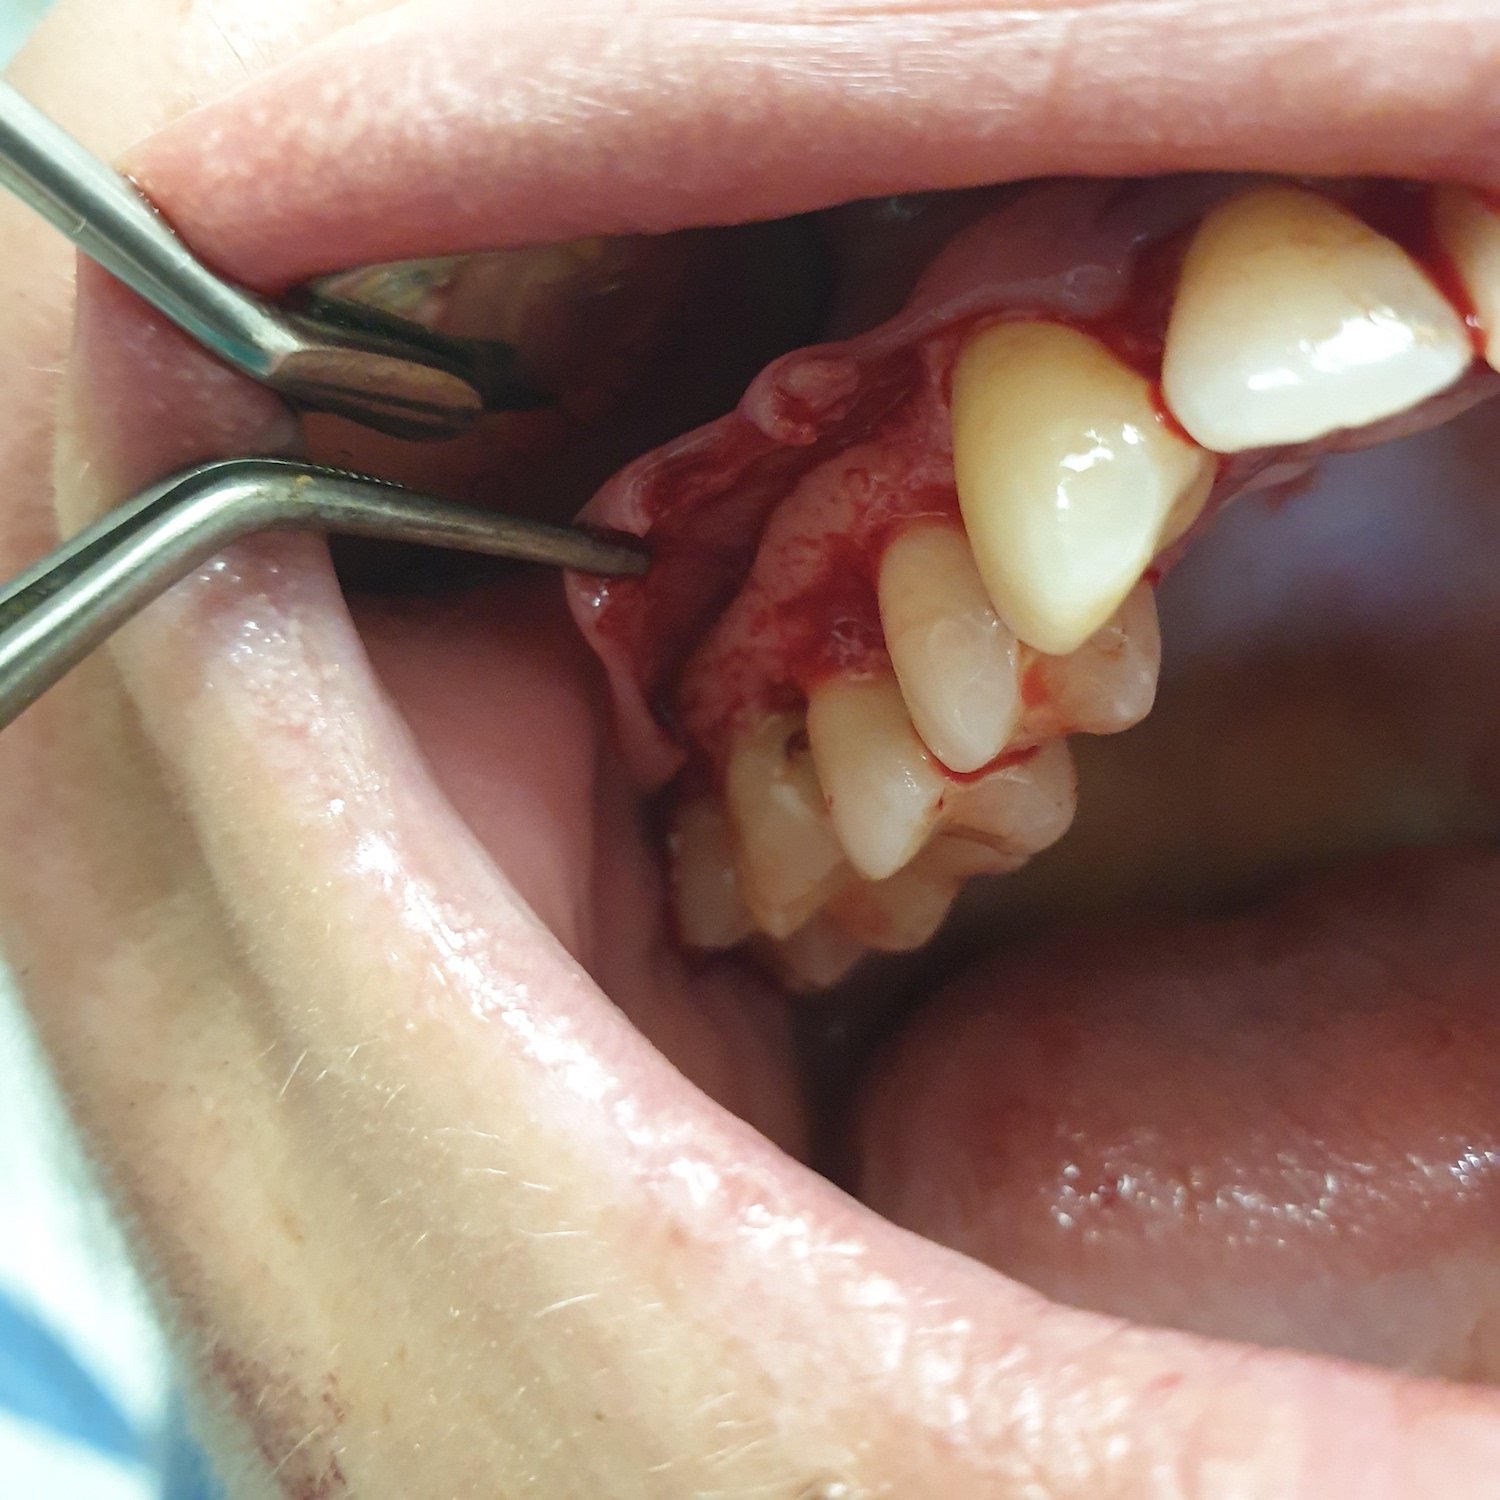 patient no.1: Lobe surgery-The course of gum lifting surgery